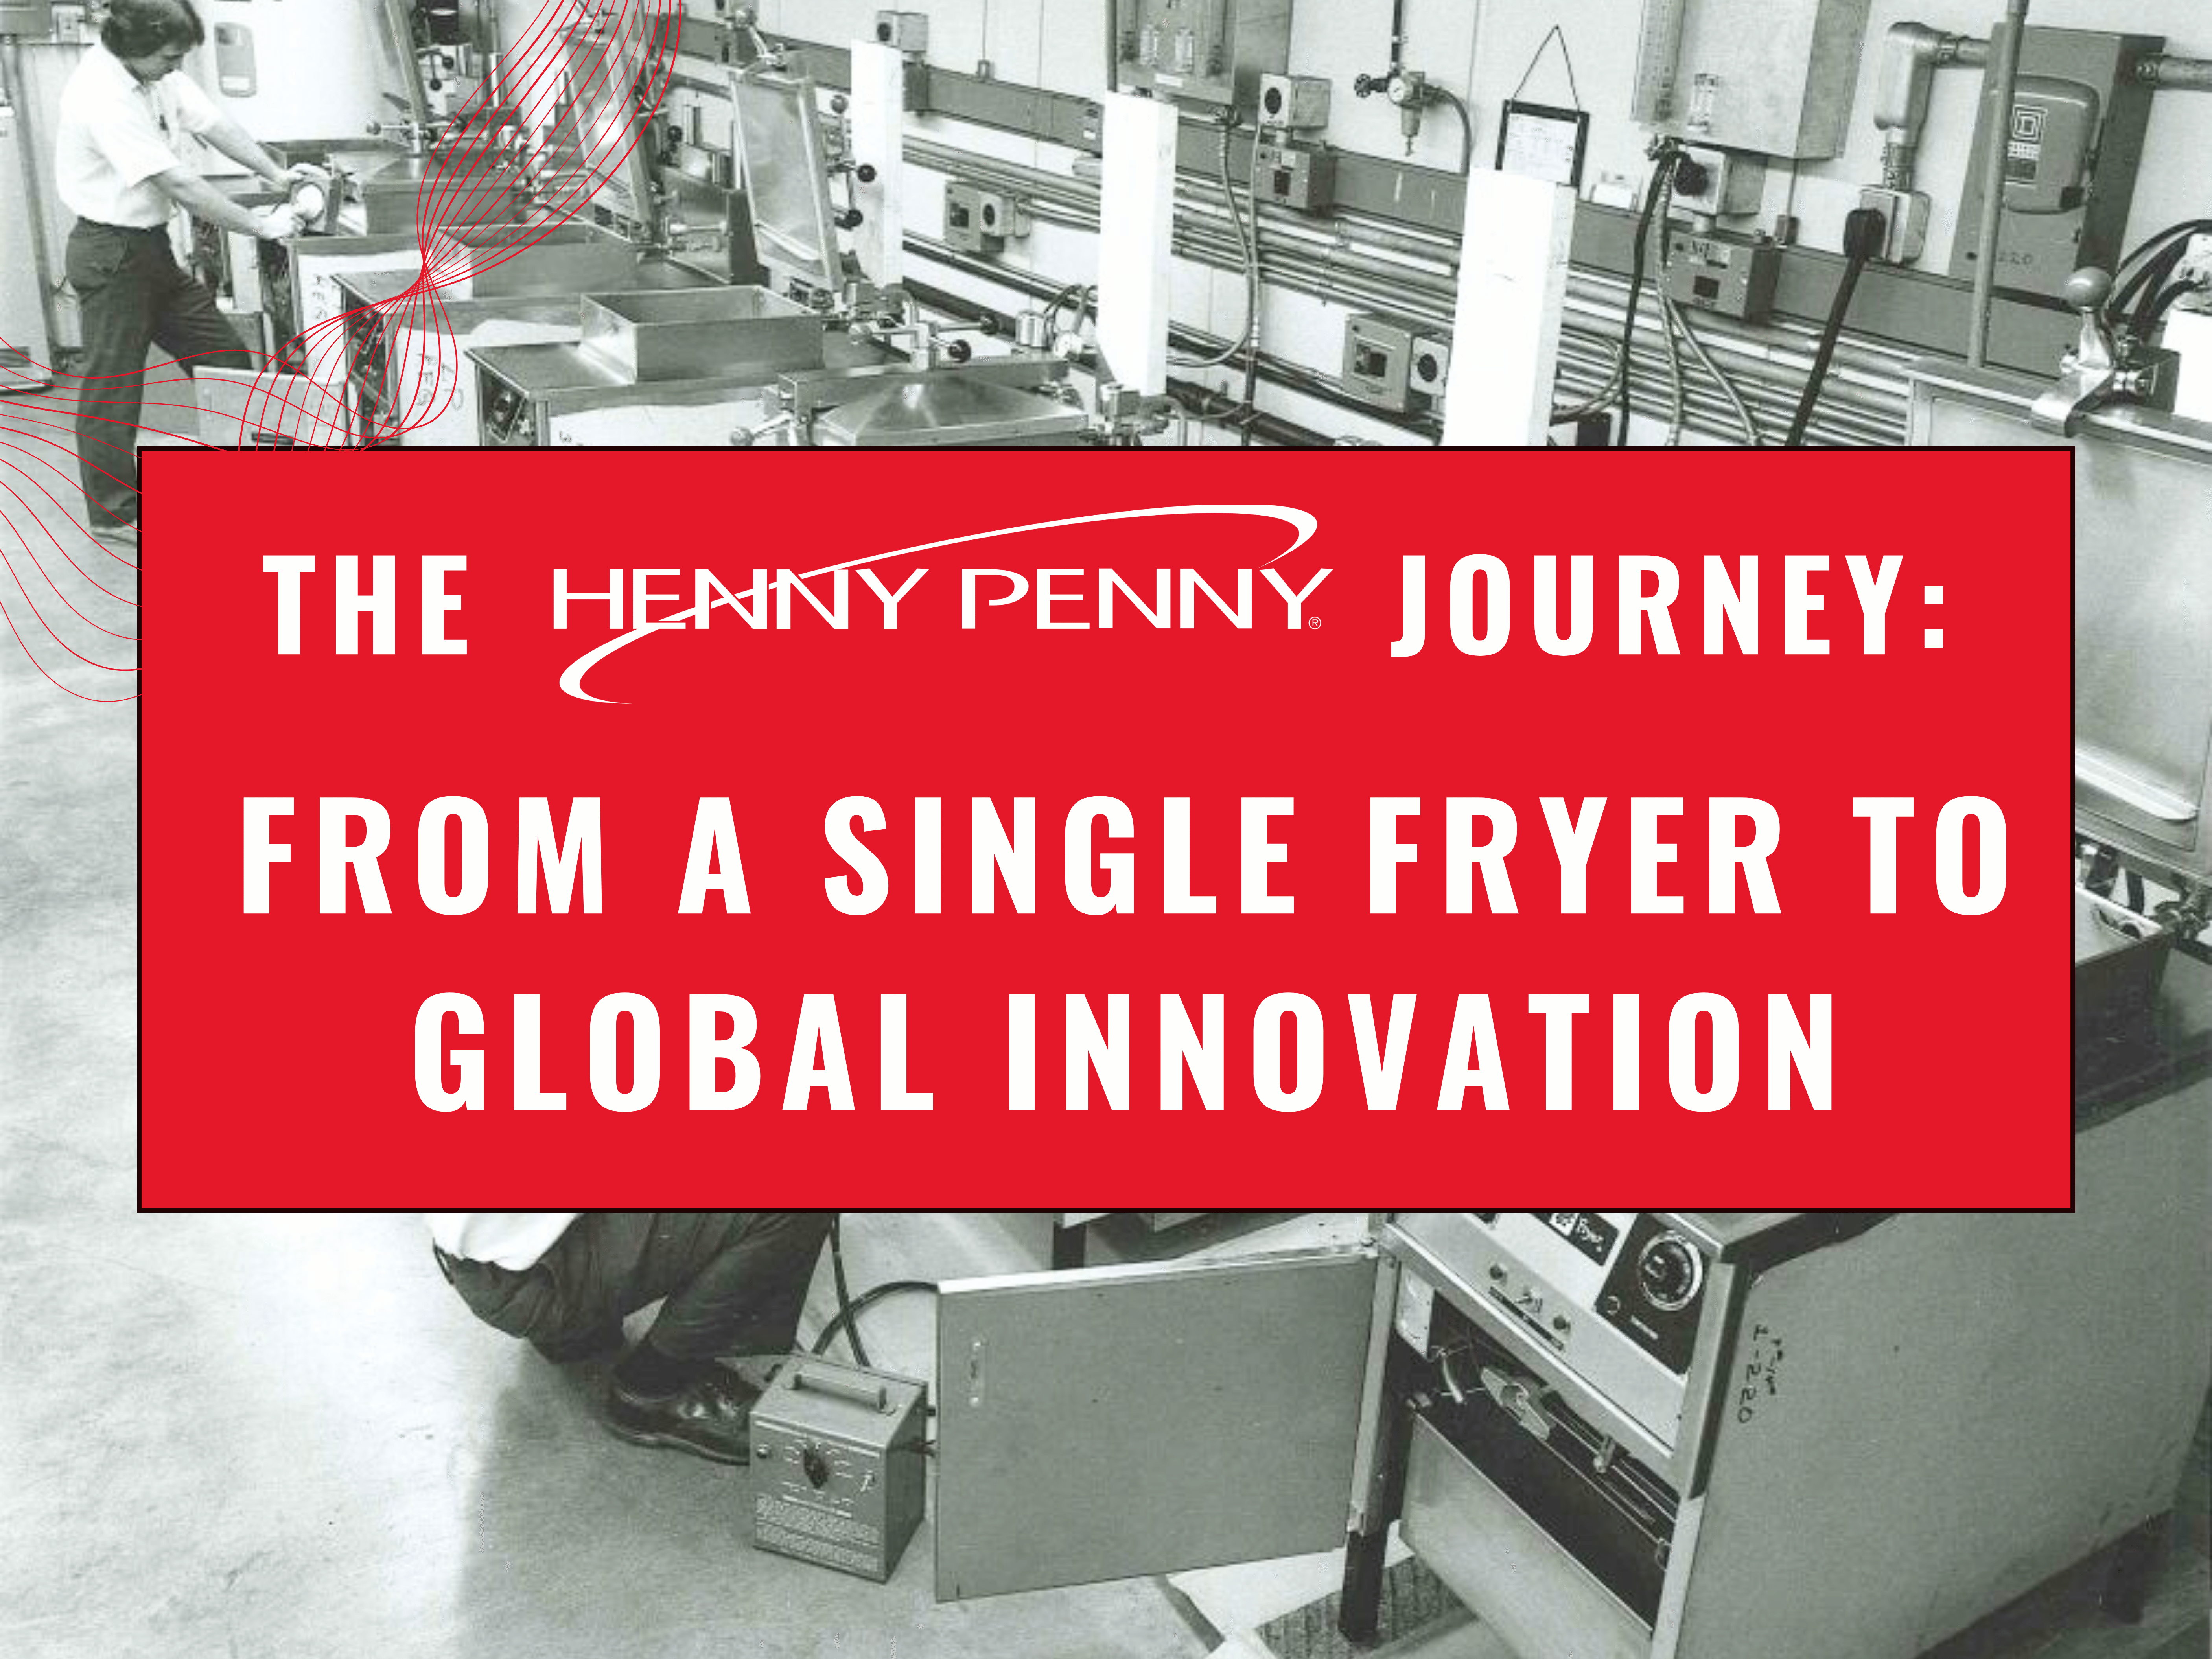 The Henny Penny Journey: From a Single Fryer to Global Innovation Home Featured